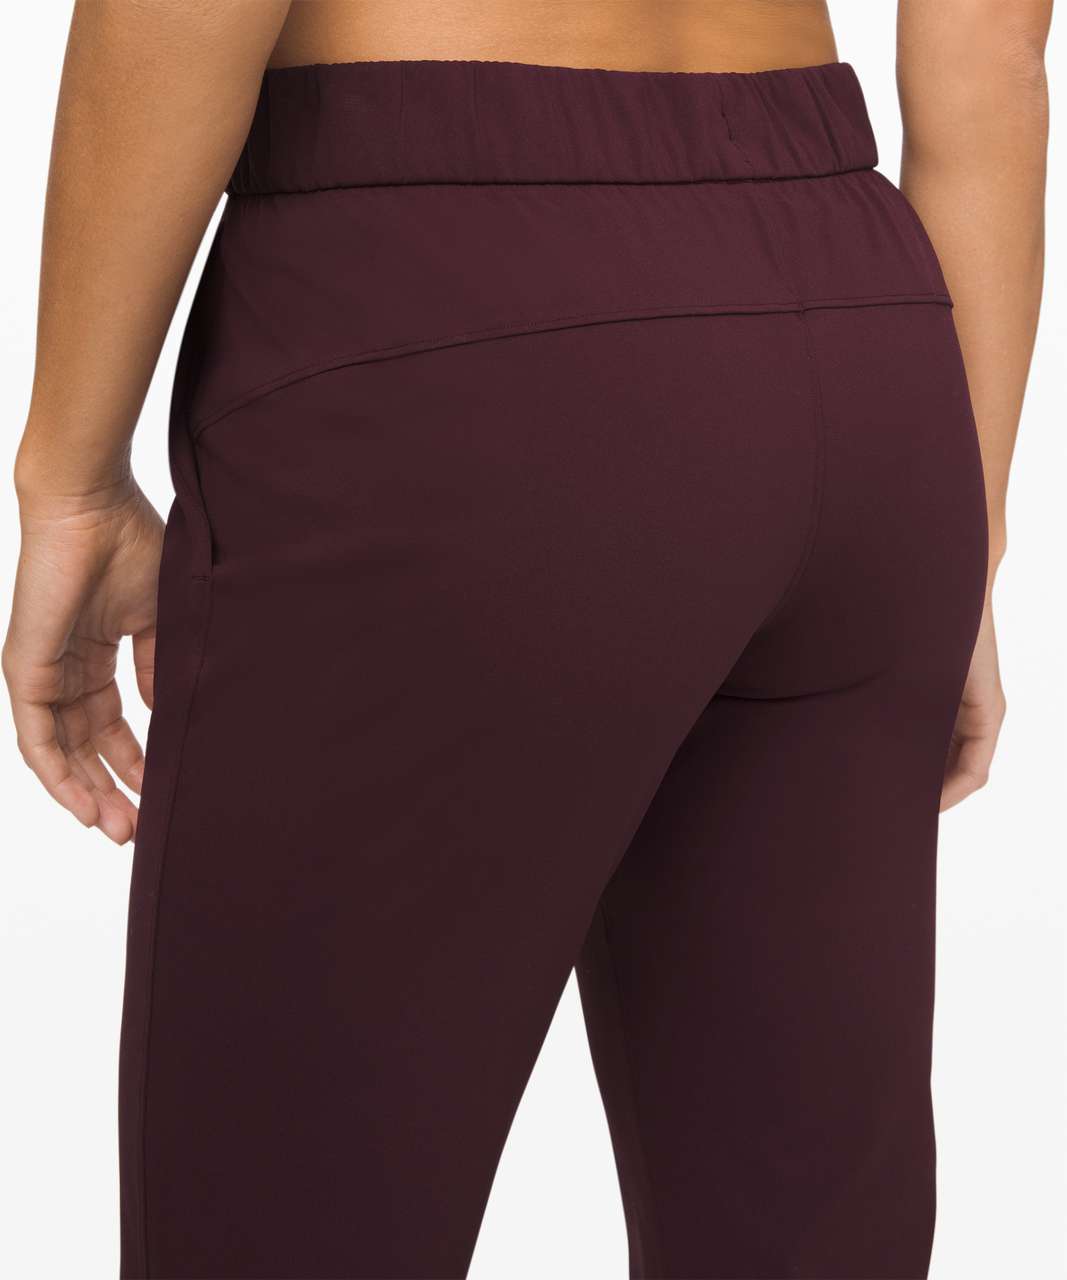 Lululemon On the Fly 7/8 Pant *28" - Cassis